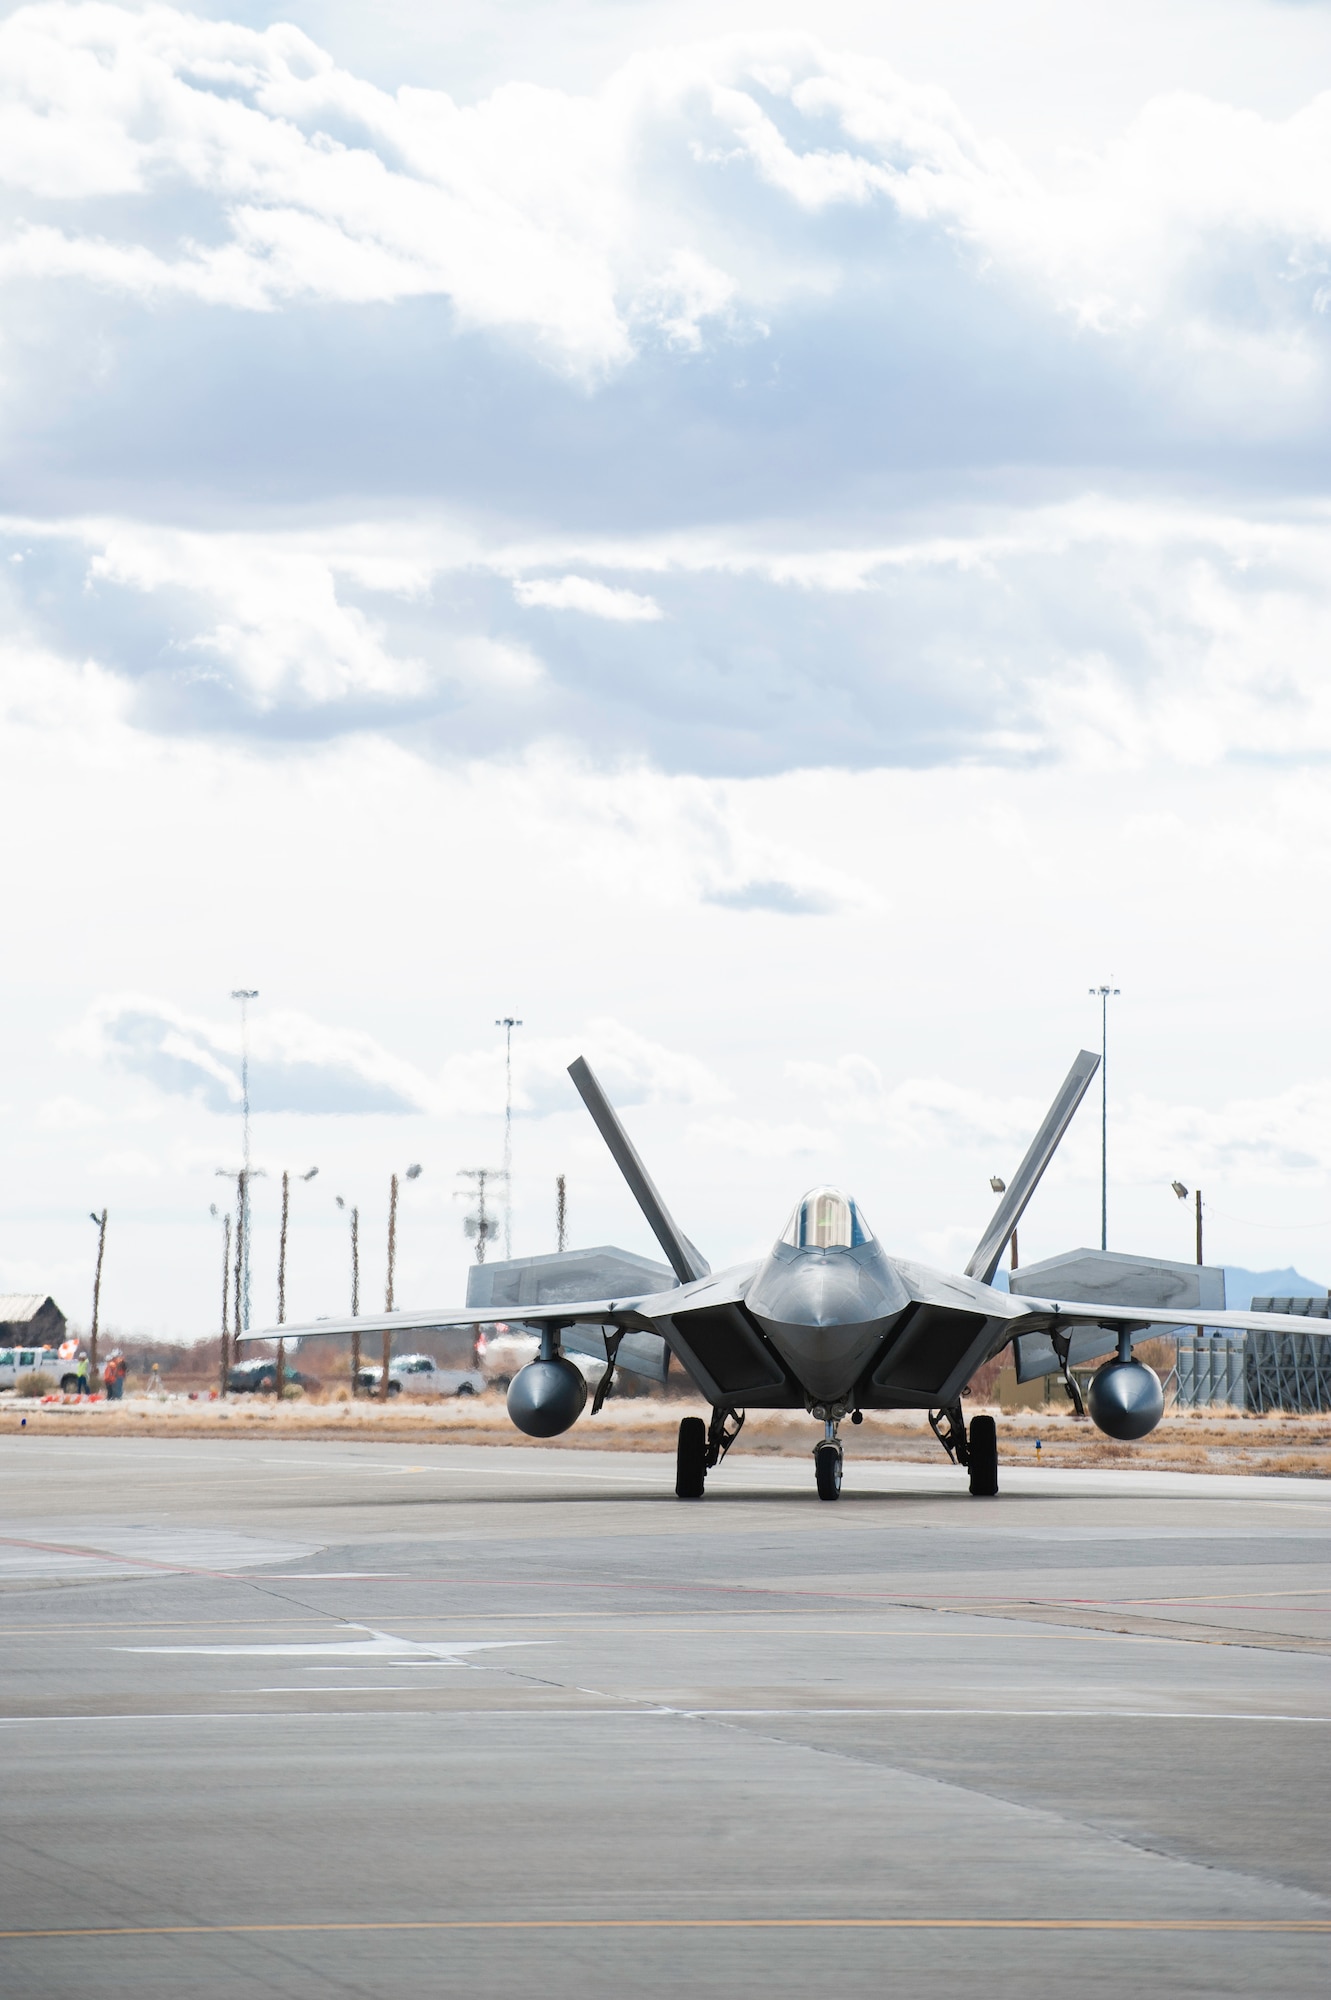 An F-22 Raptor returning from deployment taxis toward a hangar on the Holloman AFB, N.M., flightline Jan. 28.  The aircraft and around 200 personnel returned Monday from a 9-month deployment to southwest Asia ensuring regional security and joint tactical air operations.  (U.S. Air Force photo by 1st Lt. Stephanie Schonberger/Released)